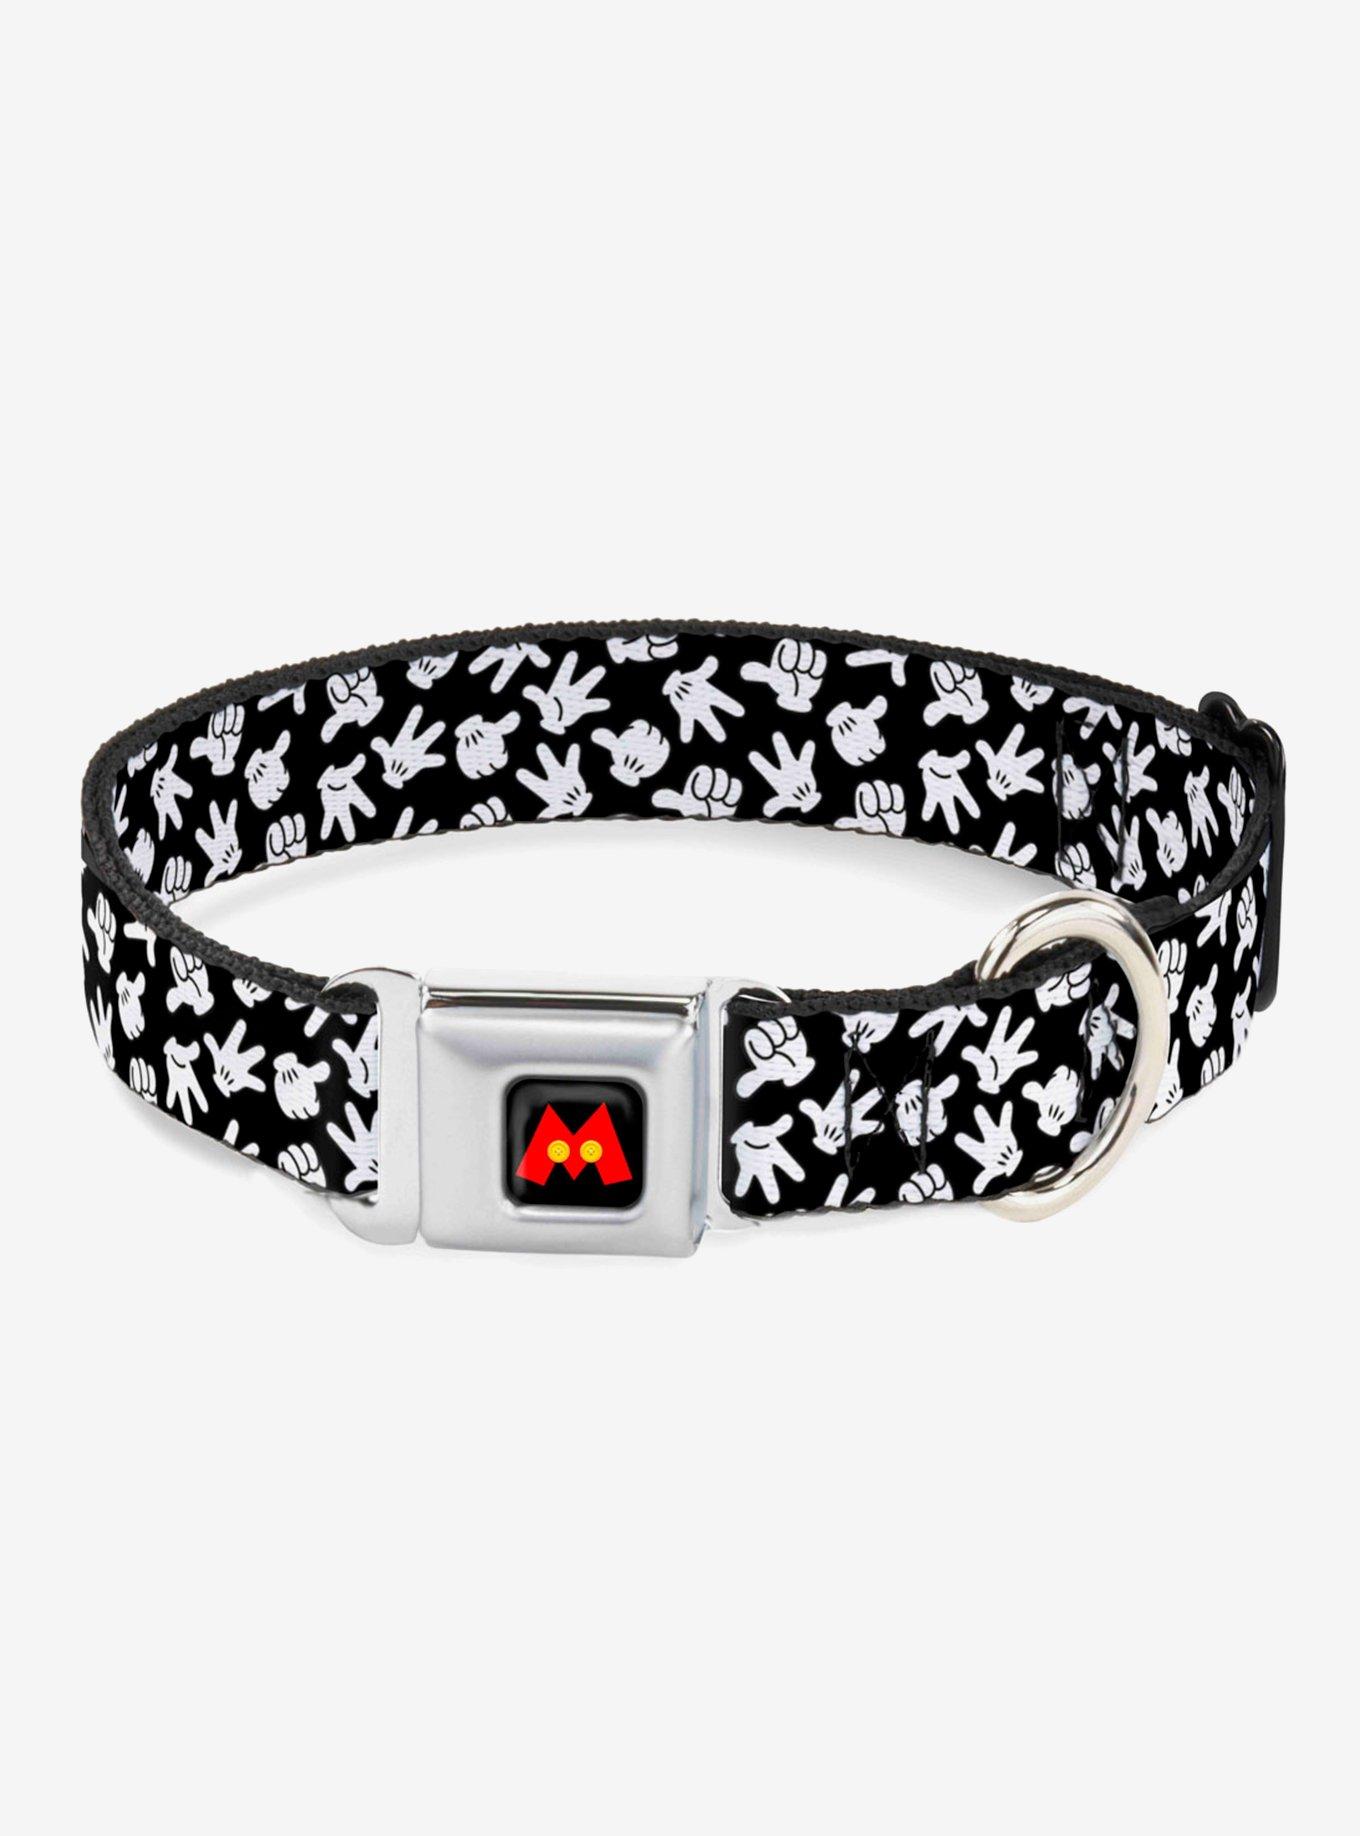 Disney Mickey Mouse Hand Gestures Scattered Dog Collar Seatbelt Buckle, BLACK  WHITE, hi-res